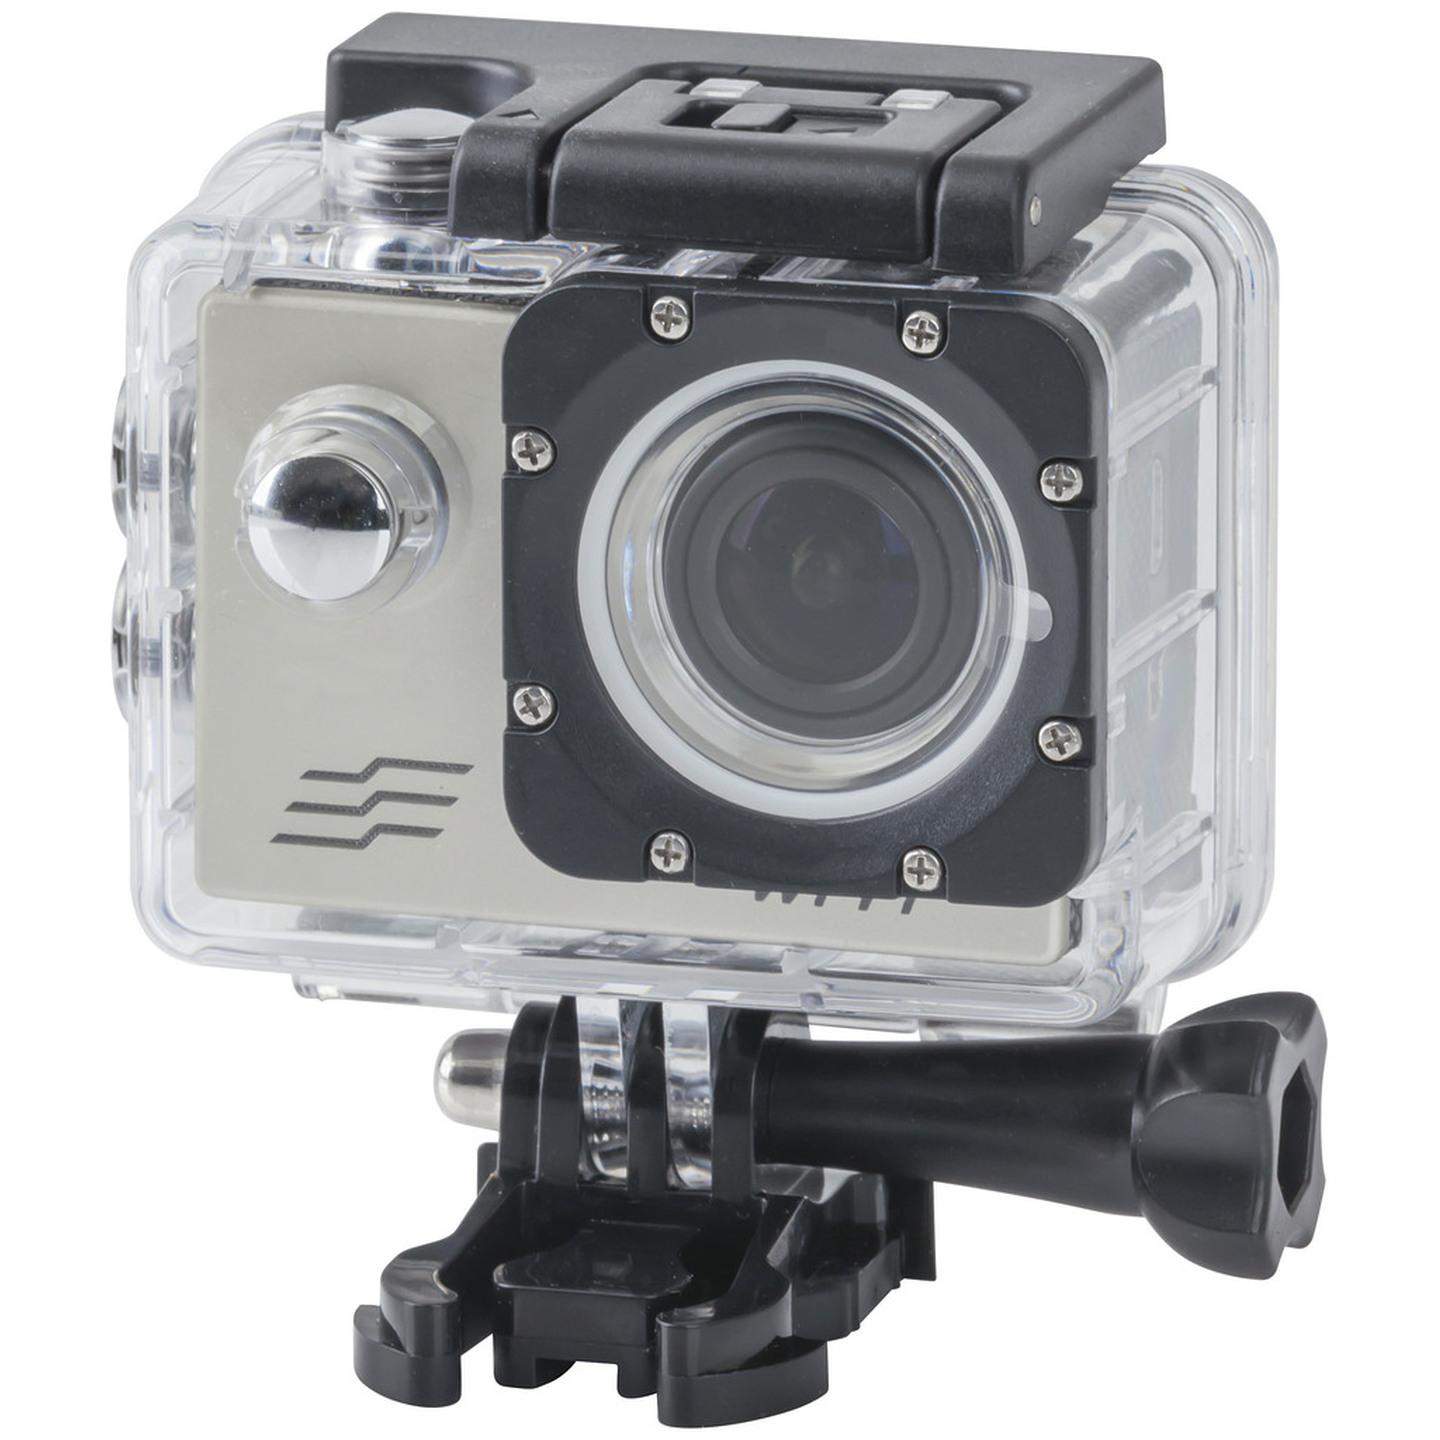 Movii Neostream 1080p Wi-Fi Action Camera with LCD